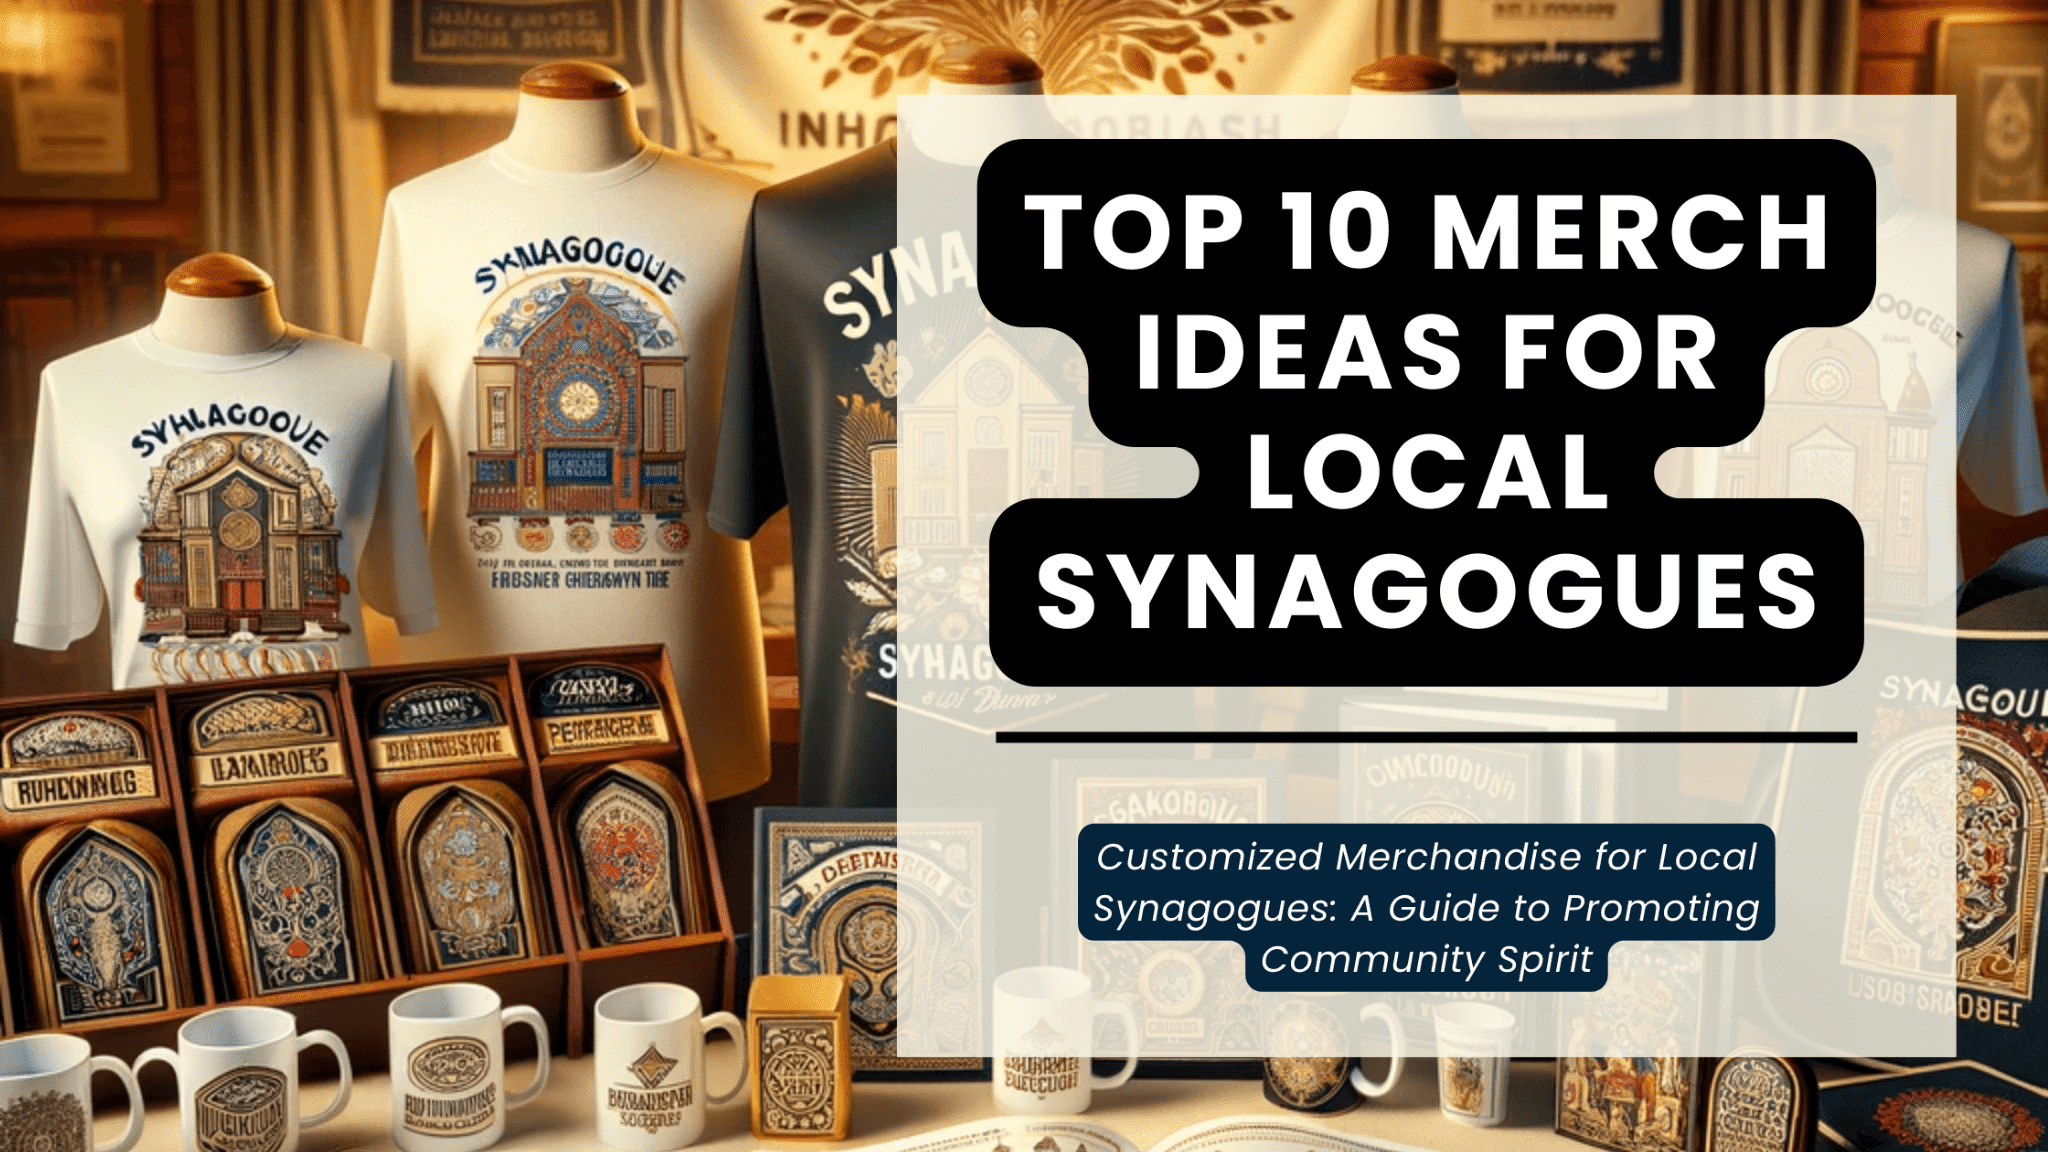 Top 10 Merchandising Ideas for Local Synagogues: A Guide to Promoting Community Spirit